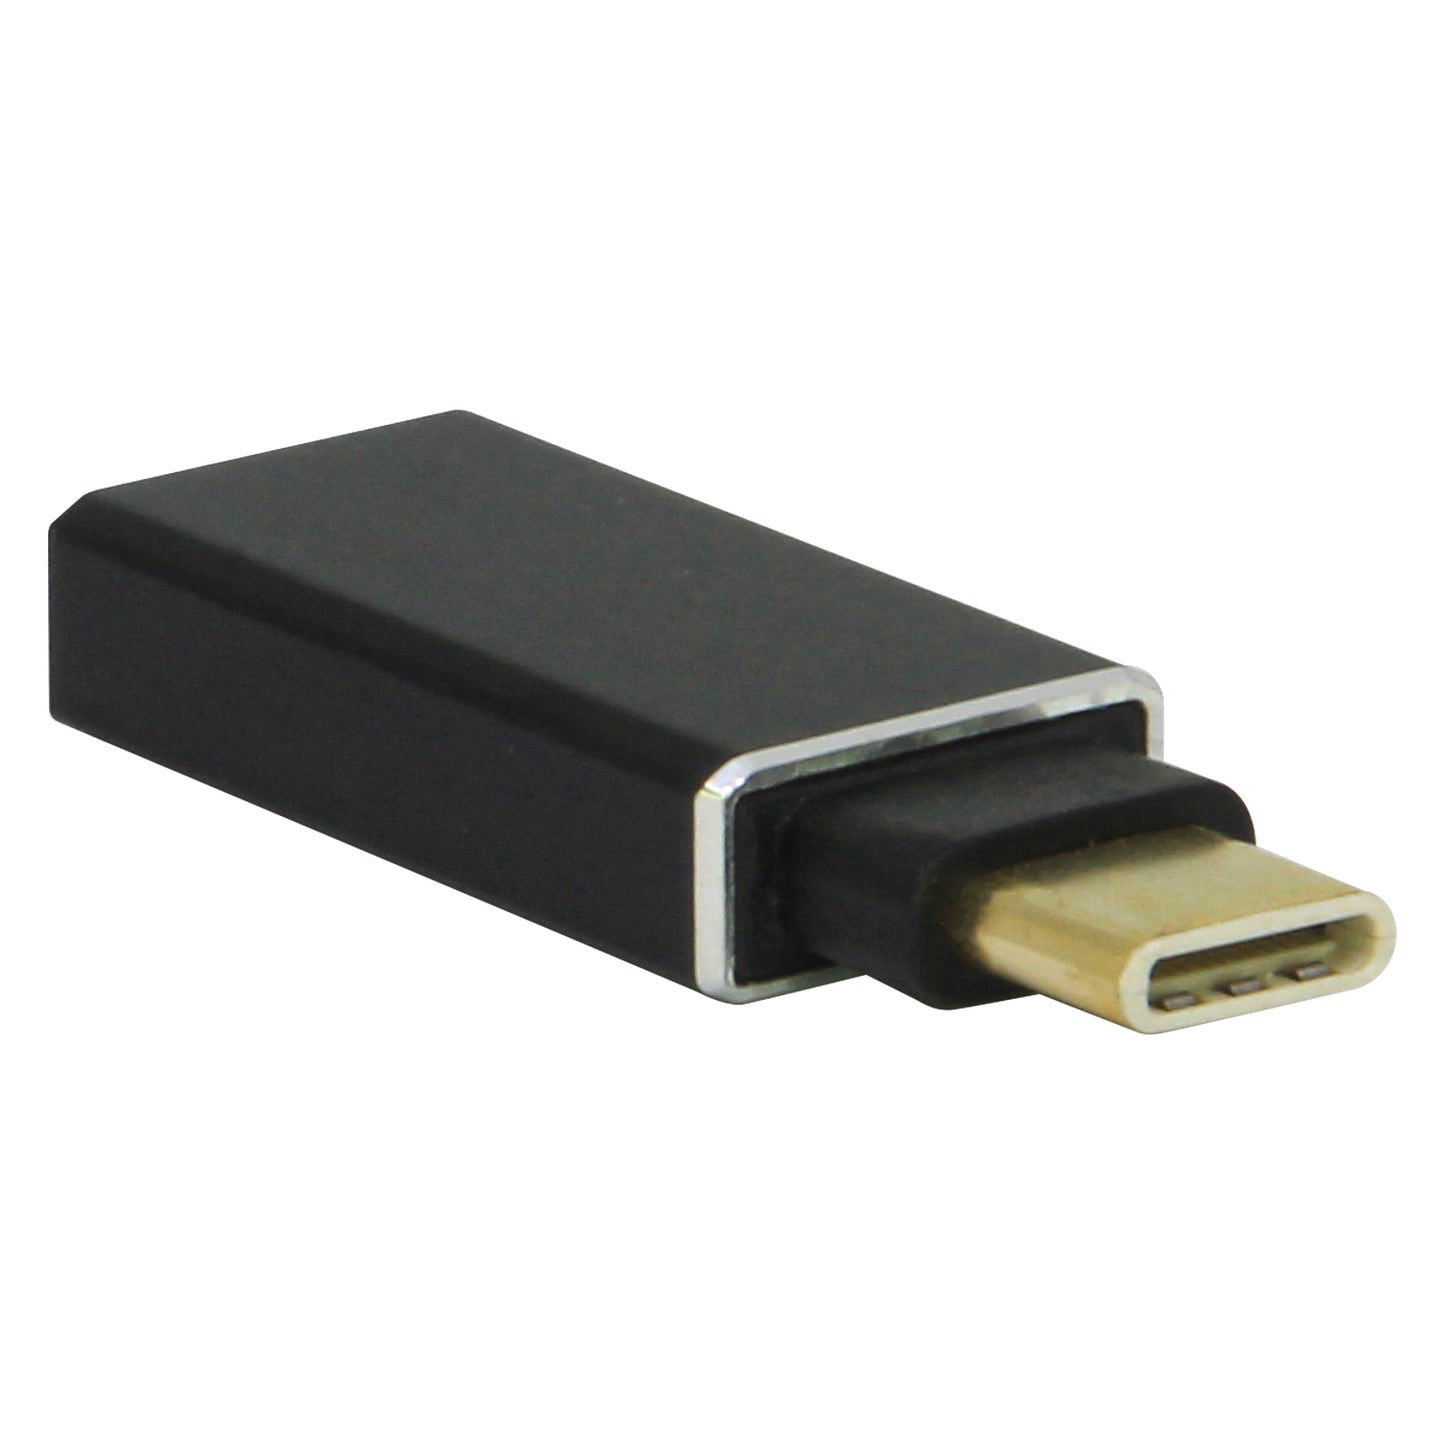 CNUSBC - CELLET USB3.0 A to Type C ADAPTER